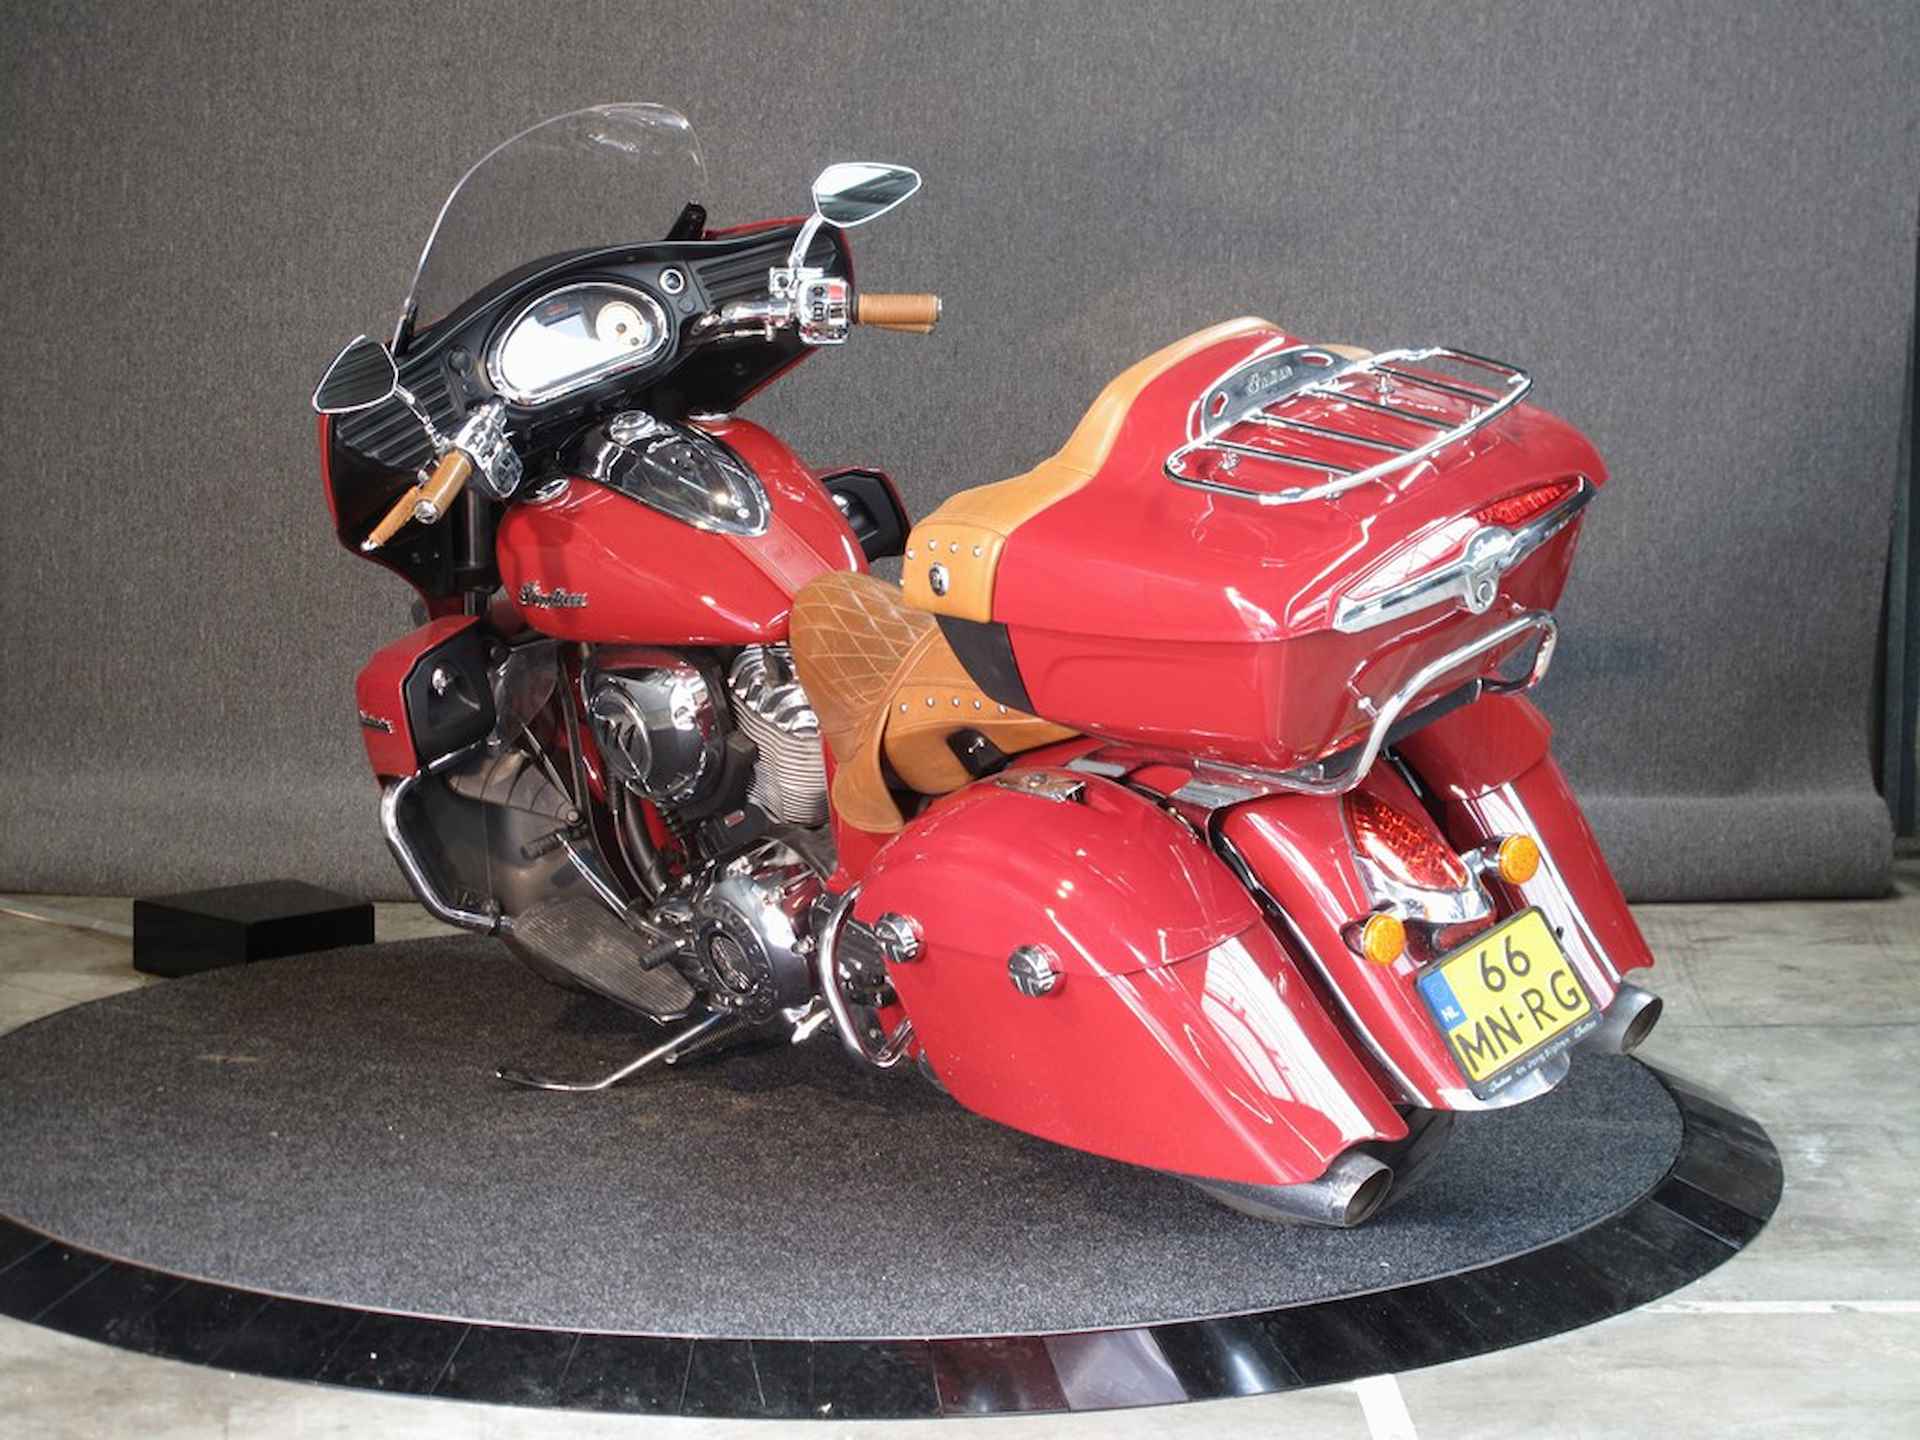 Indian Roadmaster The official Indian Motorcycle Dealer - 2/13